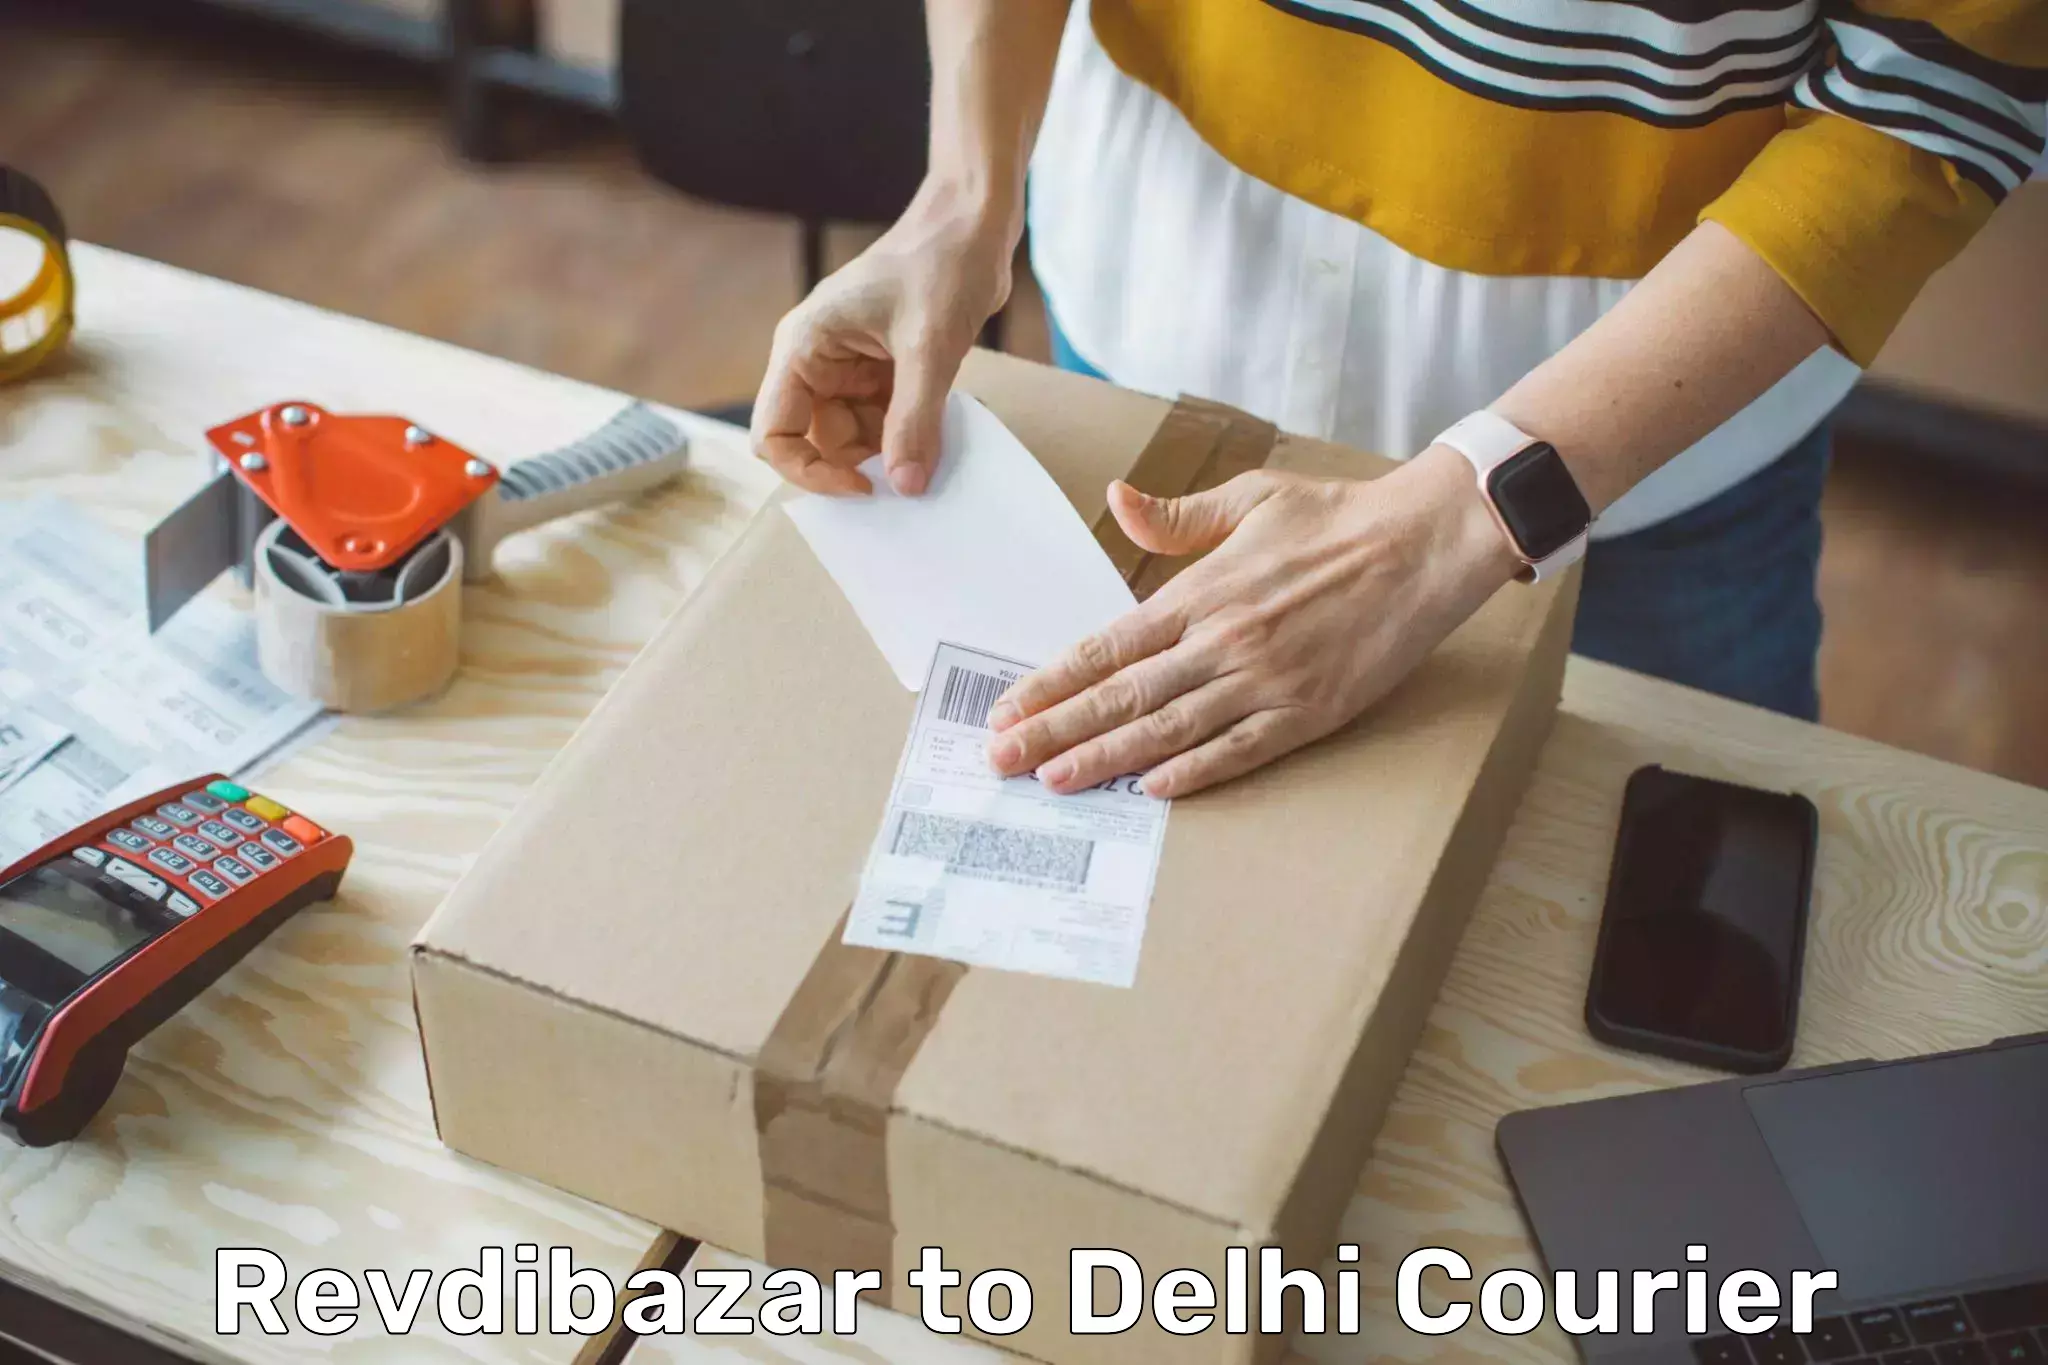 24/7 courier service in Revdibazar to Lodhi Road